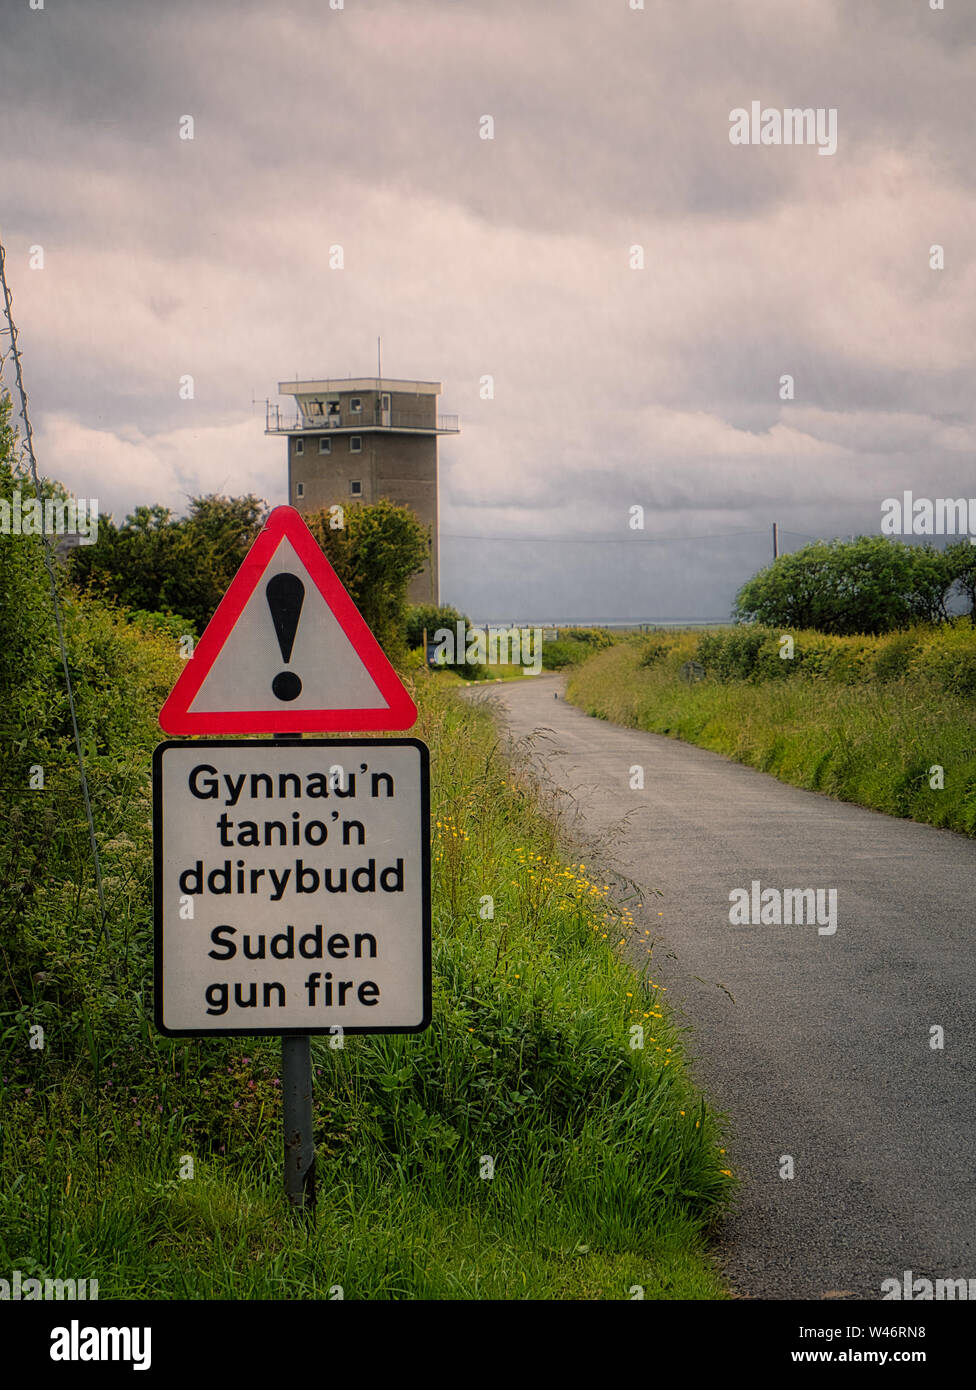 An unusual road sign near the Castlemartin Training Area firing ranges in Pembrokeshire, Wales Stock Photo